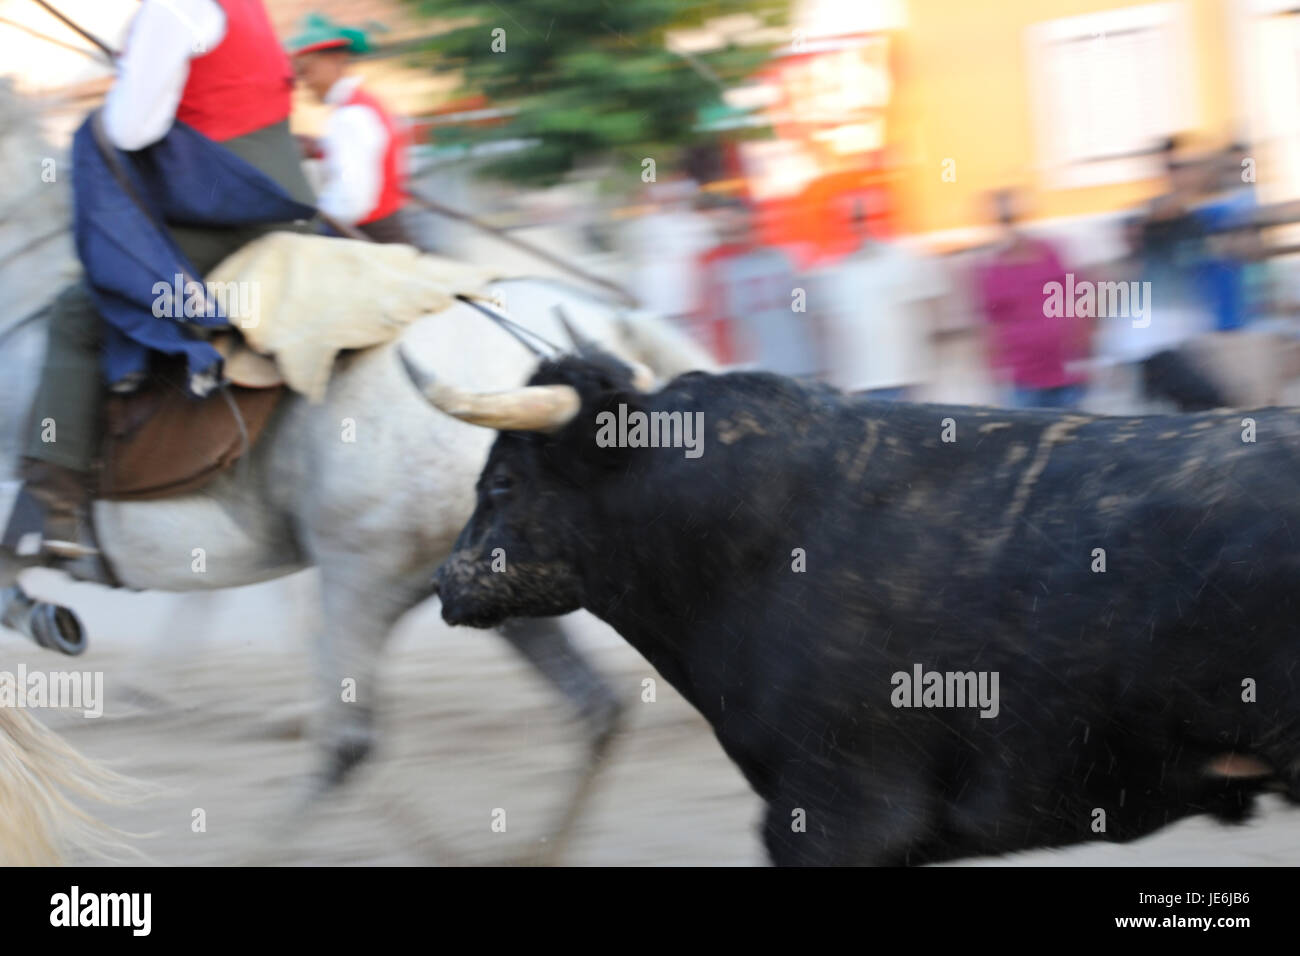 Traditional running of wild bulls by the 'campinos', during the Barrete Verde (Green Cap) festivities. Alcochete, Portugal Stock Photo